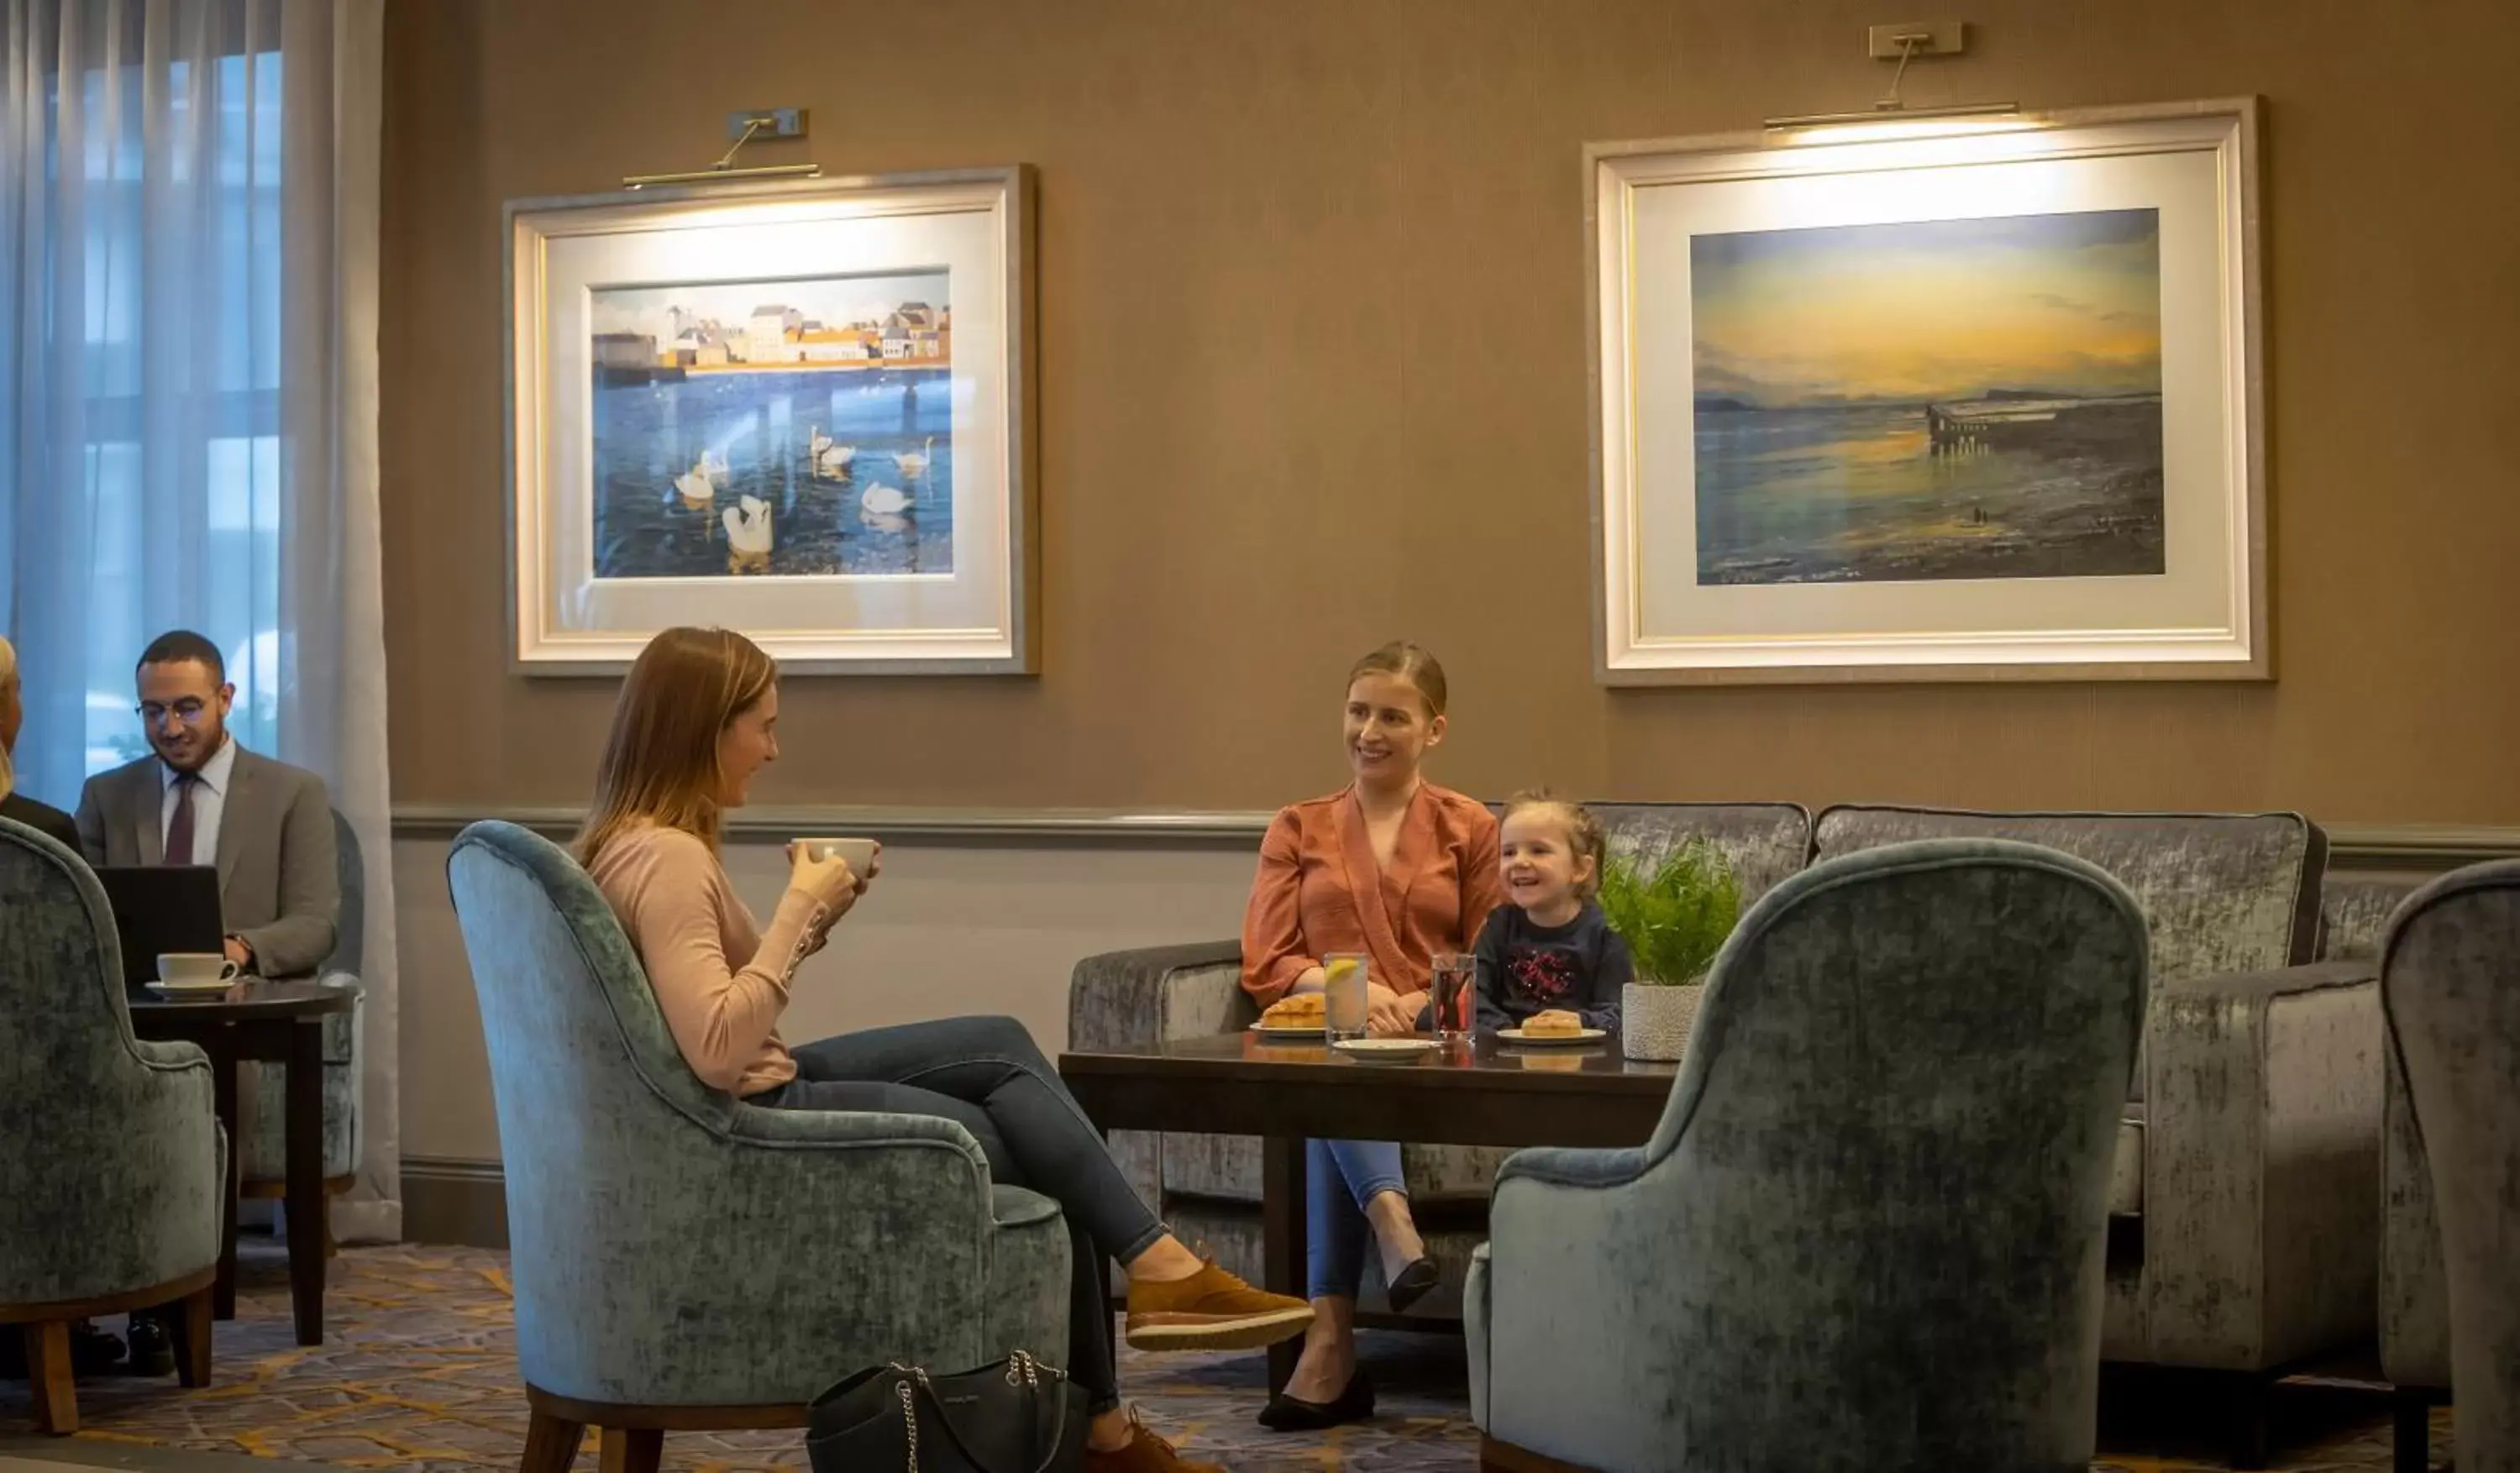 Lobby or reception in Maldron Hotel & Leisure Centre, Oranmore Galway